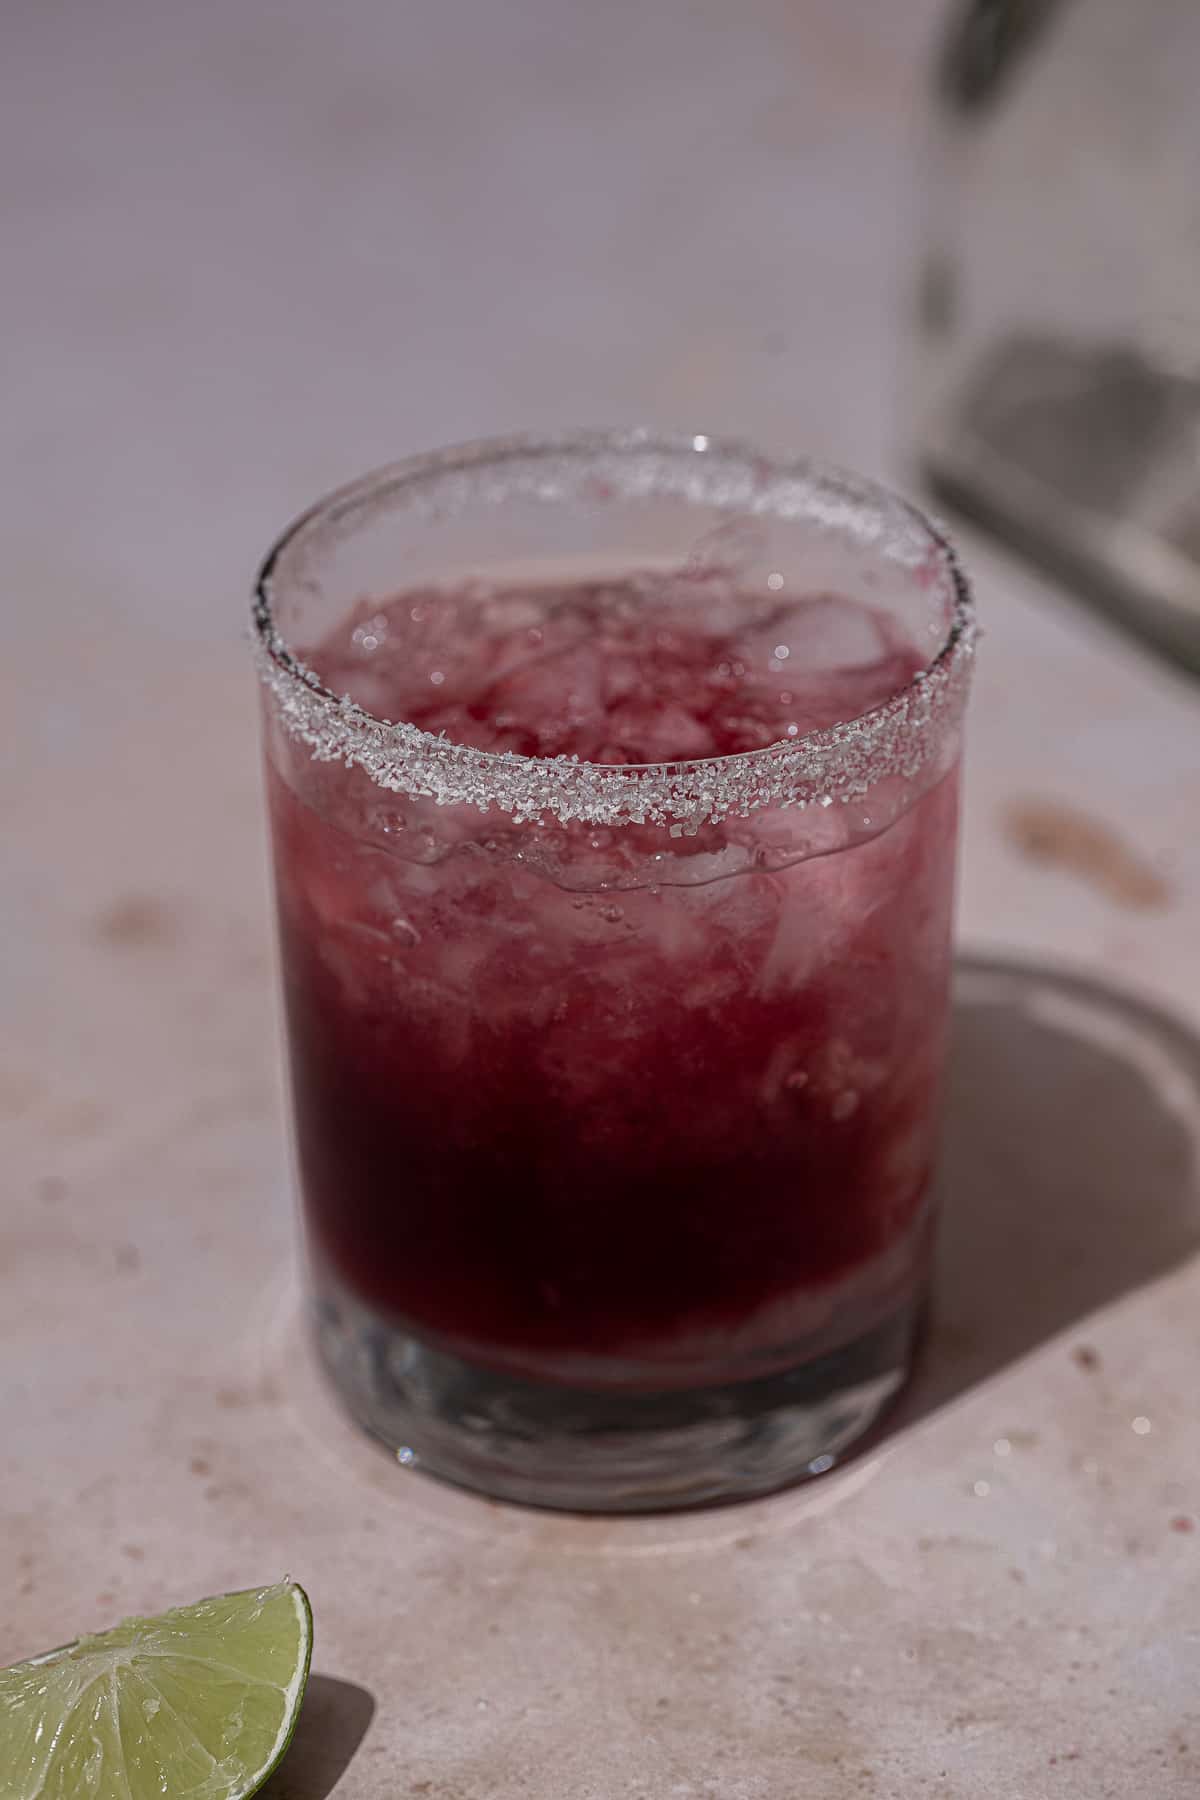 Ice, pomegranate juice, tequila, and triple sec in a cocktail glass.